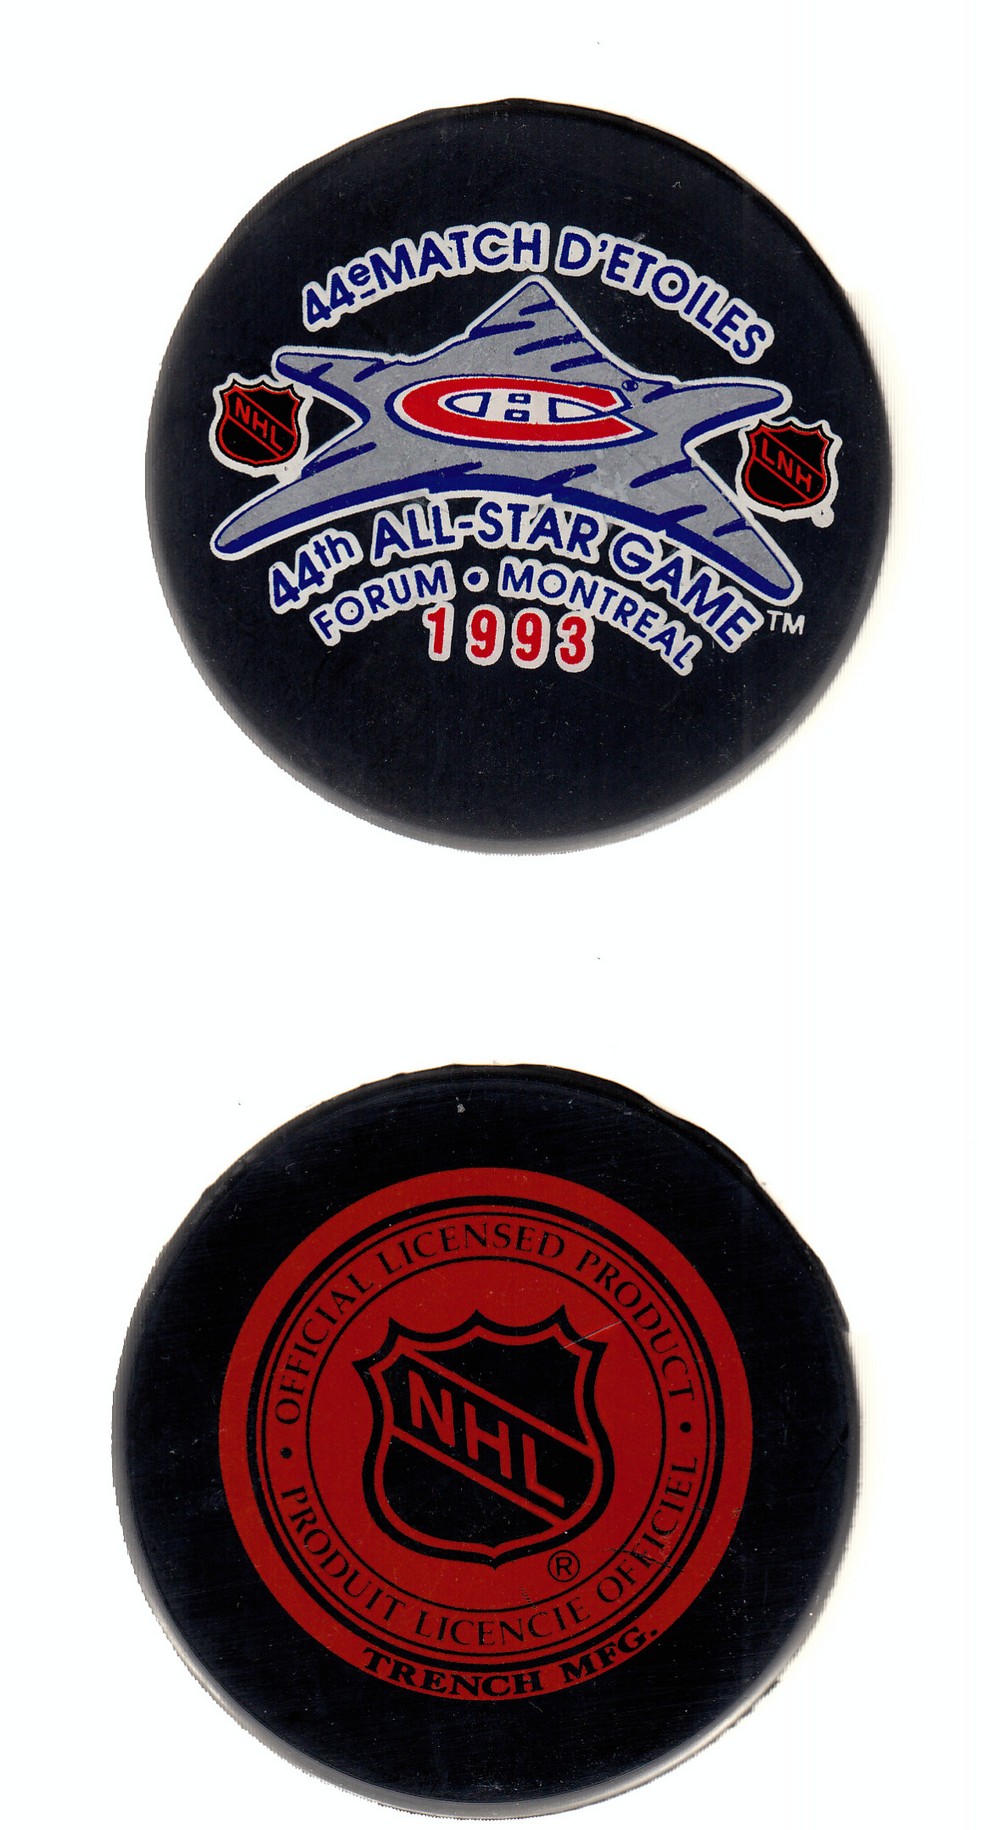 1993-94 CZECHOSLOVAKIA MONTREAL ALL-STAR GAME PUCK photo